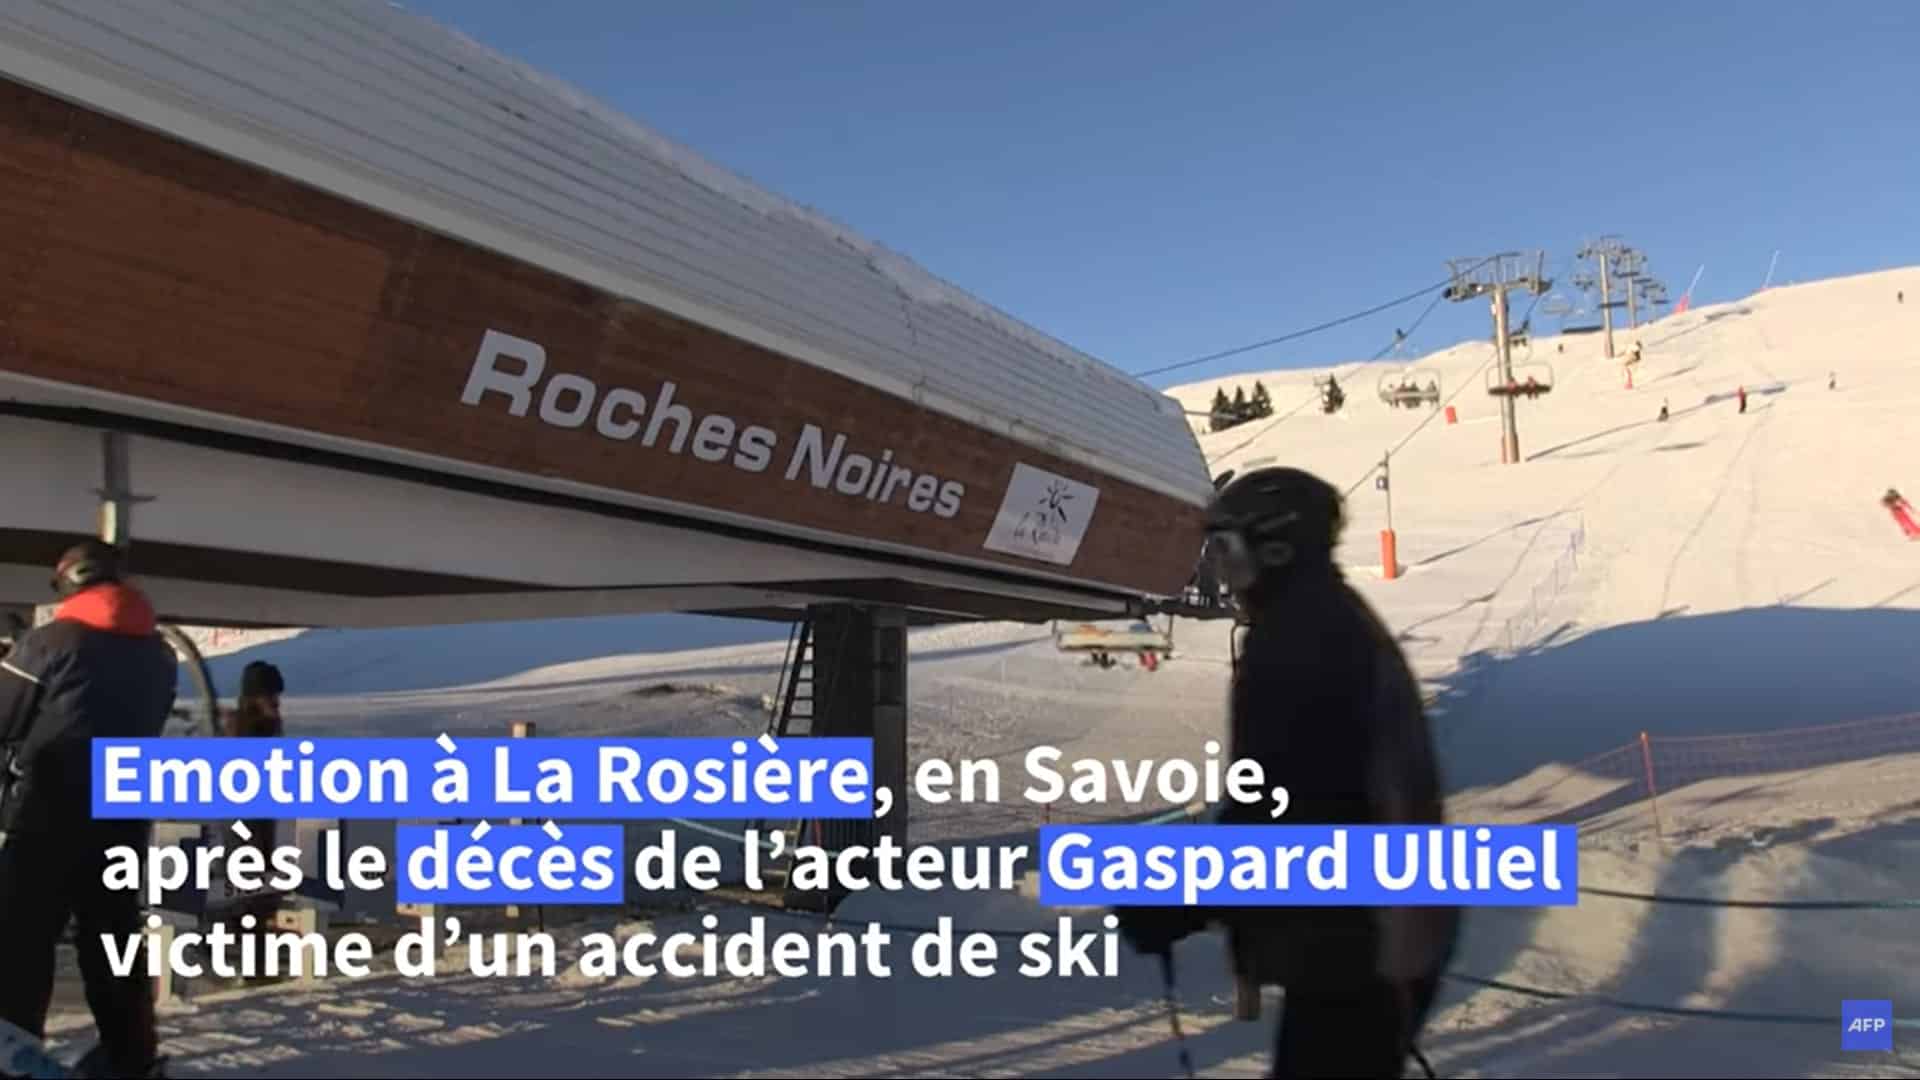 Video of Gaspard Ulliel's Skiing Accident